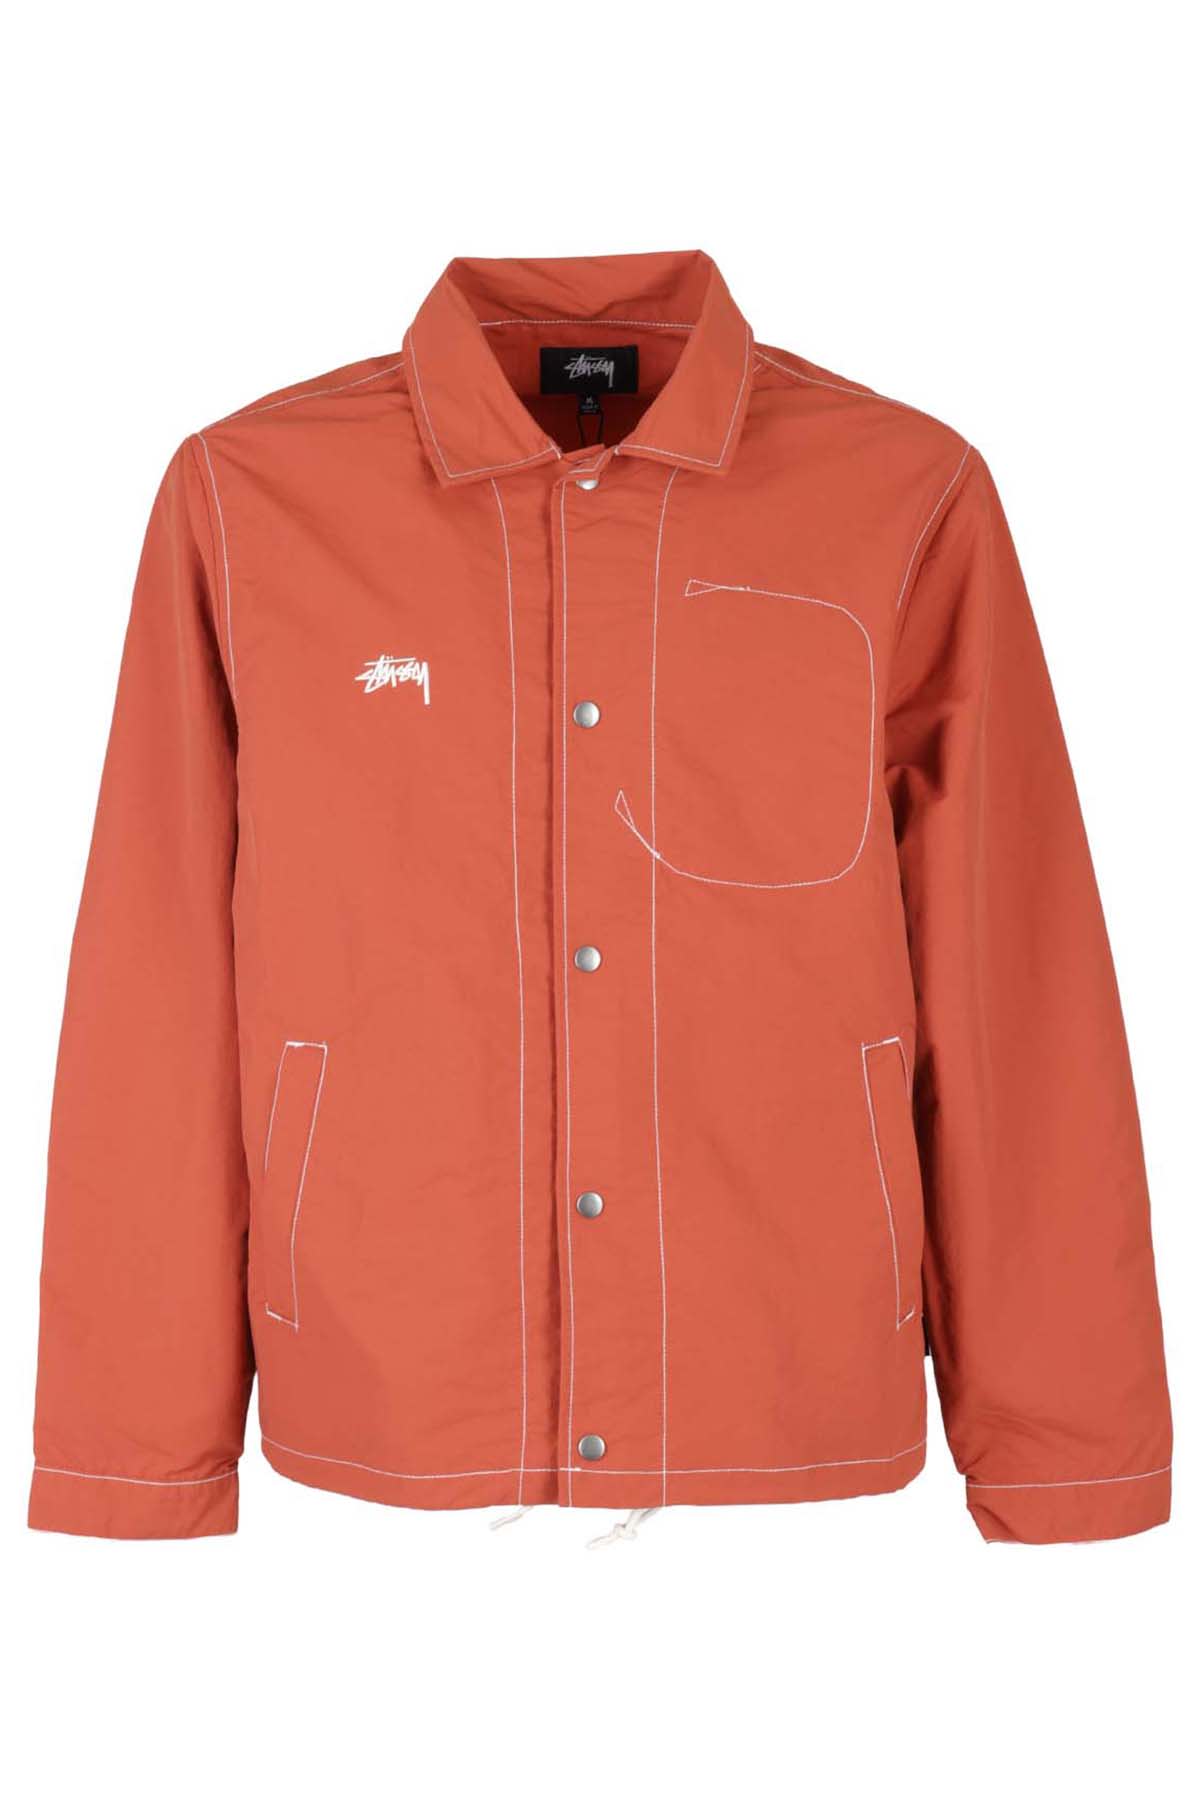 Stussy Jacket In Burnt Red